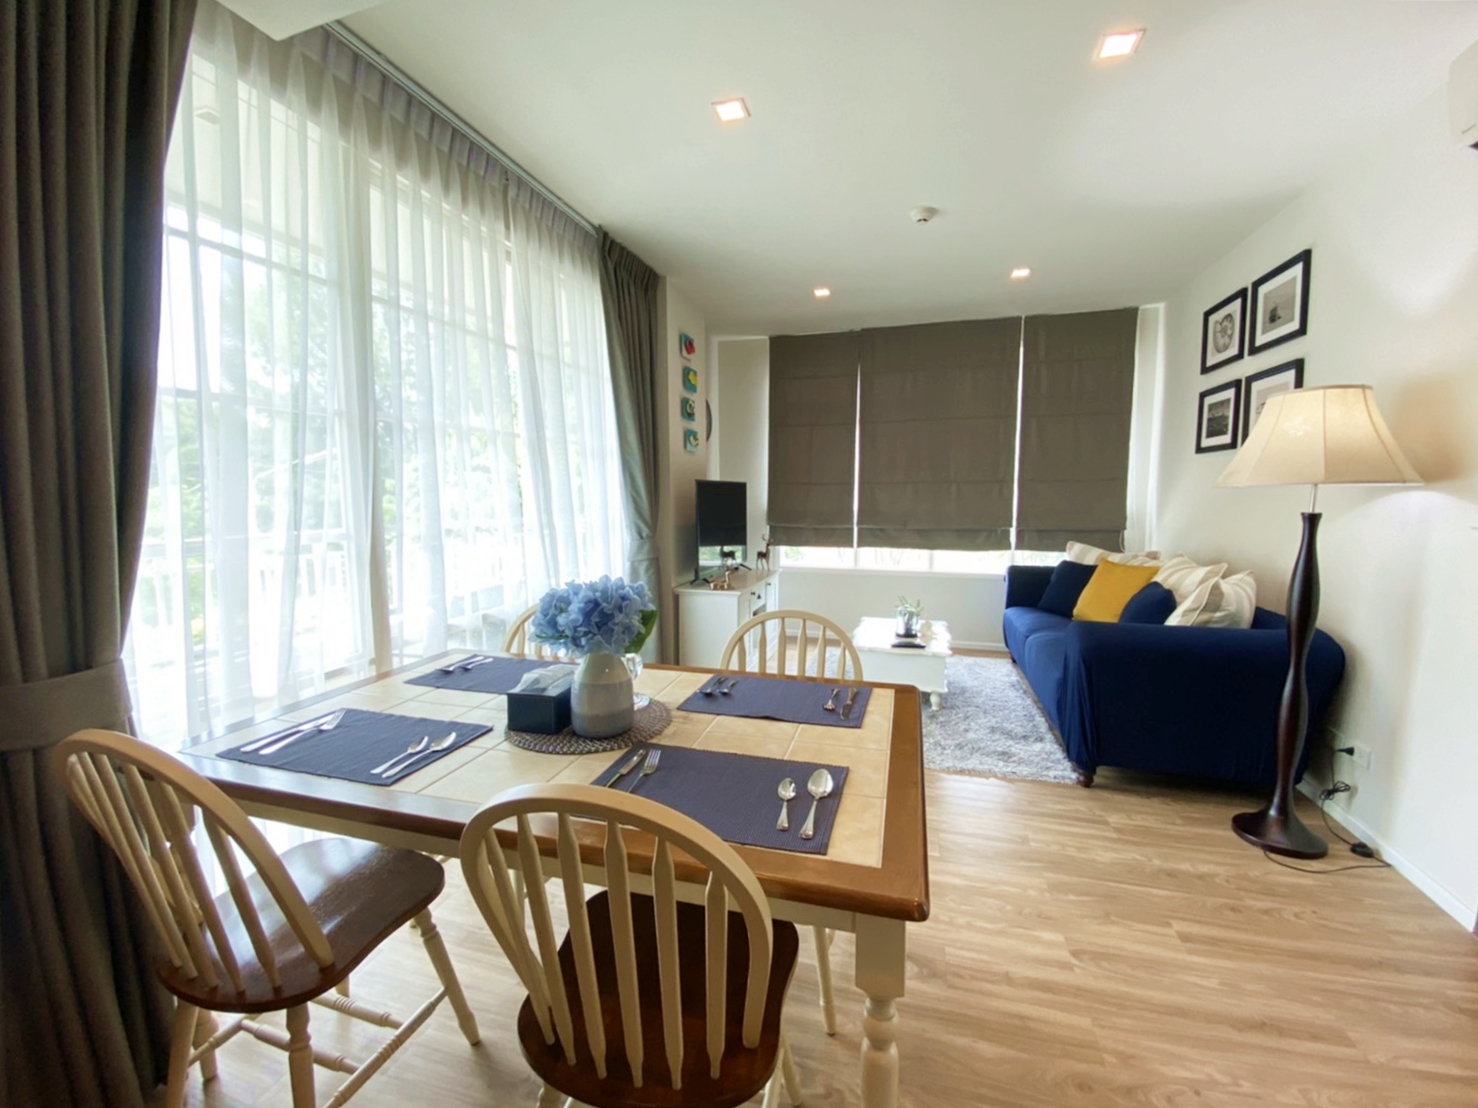 A wonderful condominium boasting bright, expansive and airy living space.